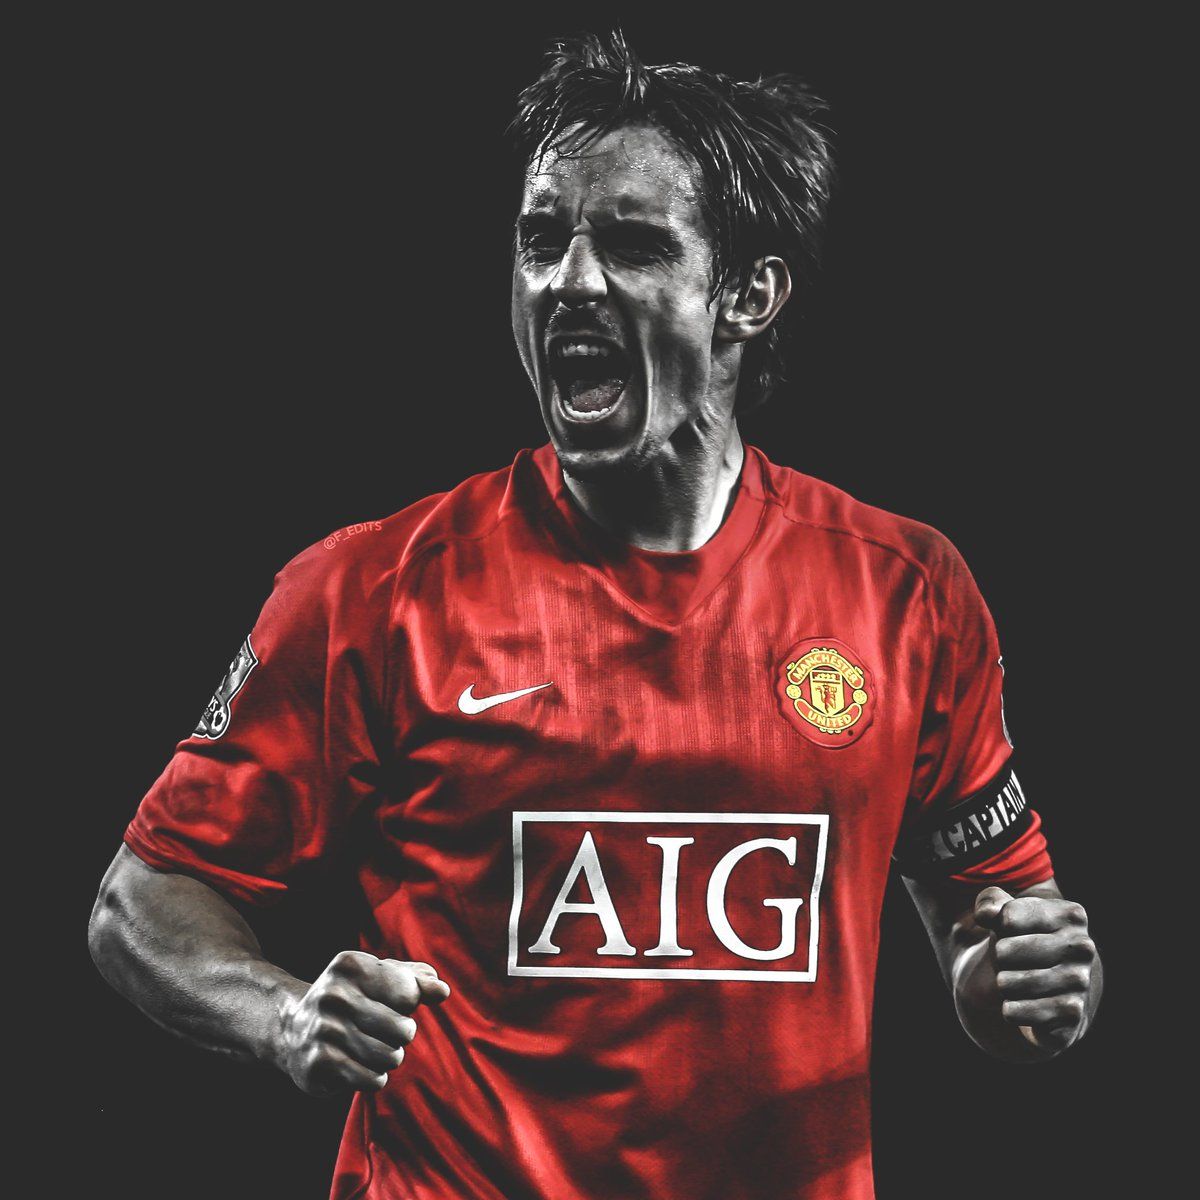 Fredrik Neville. #MUFC. iPhone wallpaper and icon